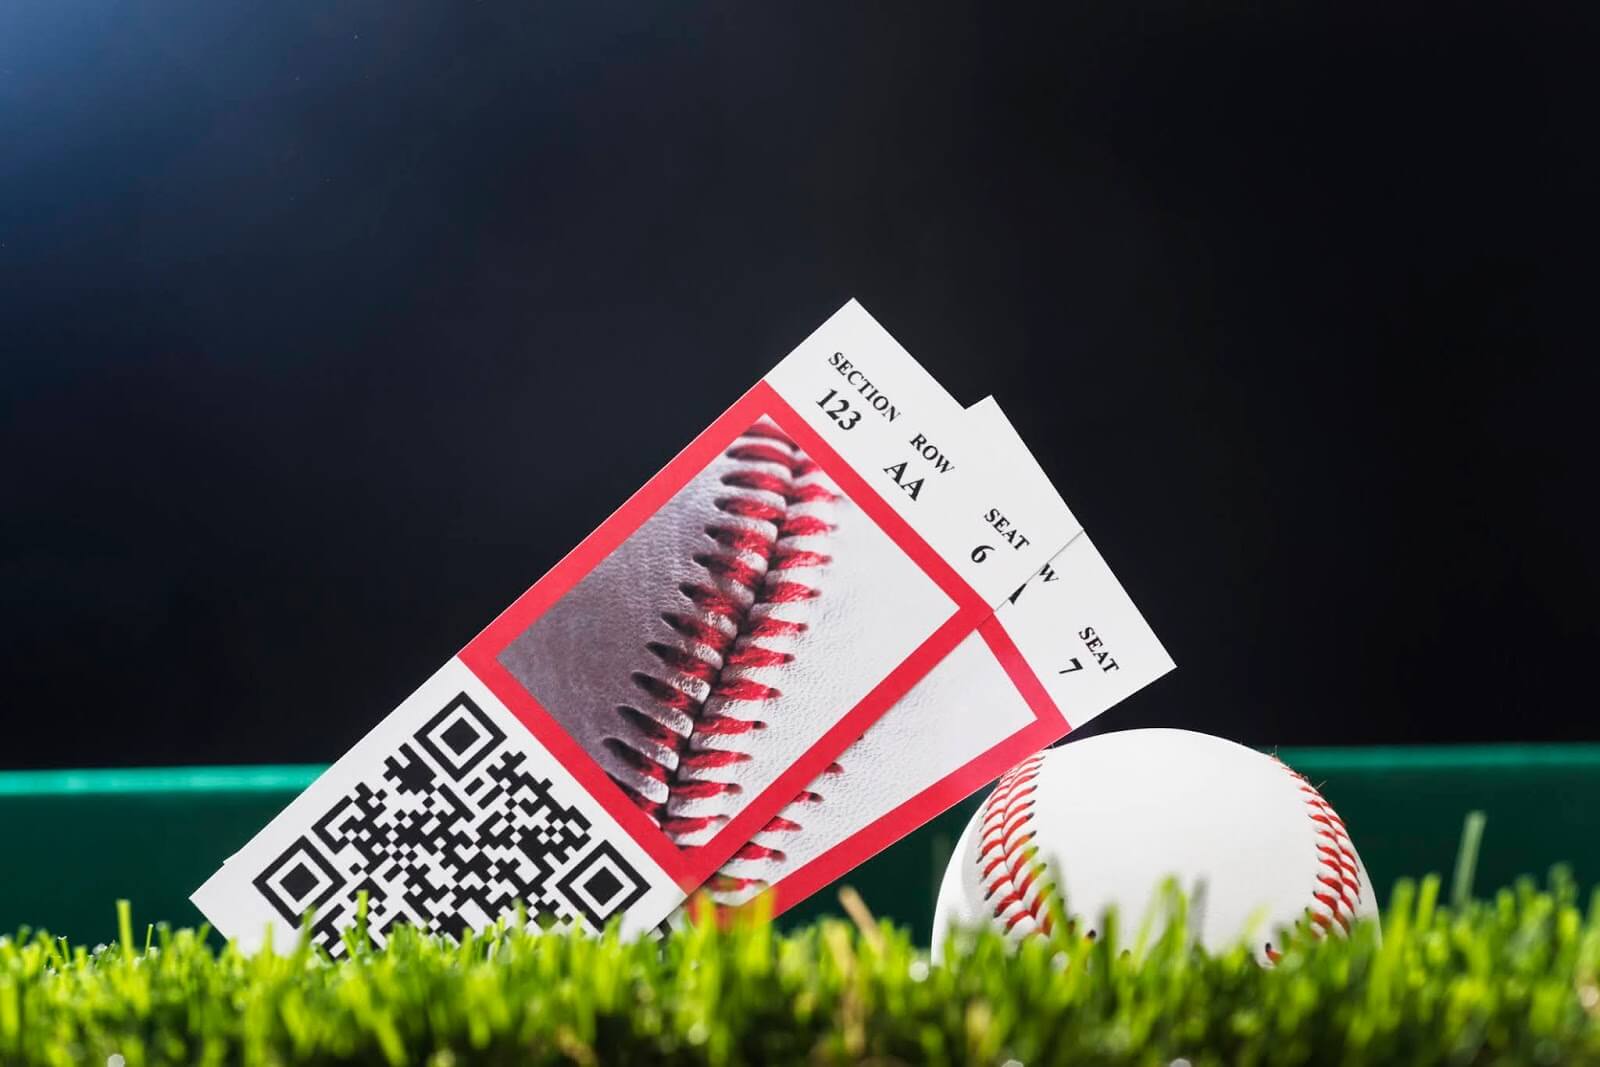 Tickets to a Baseball Game